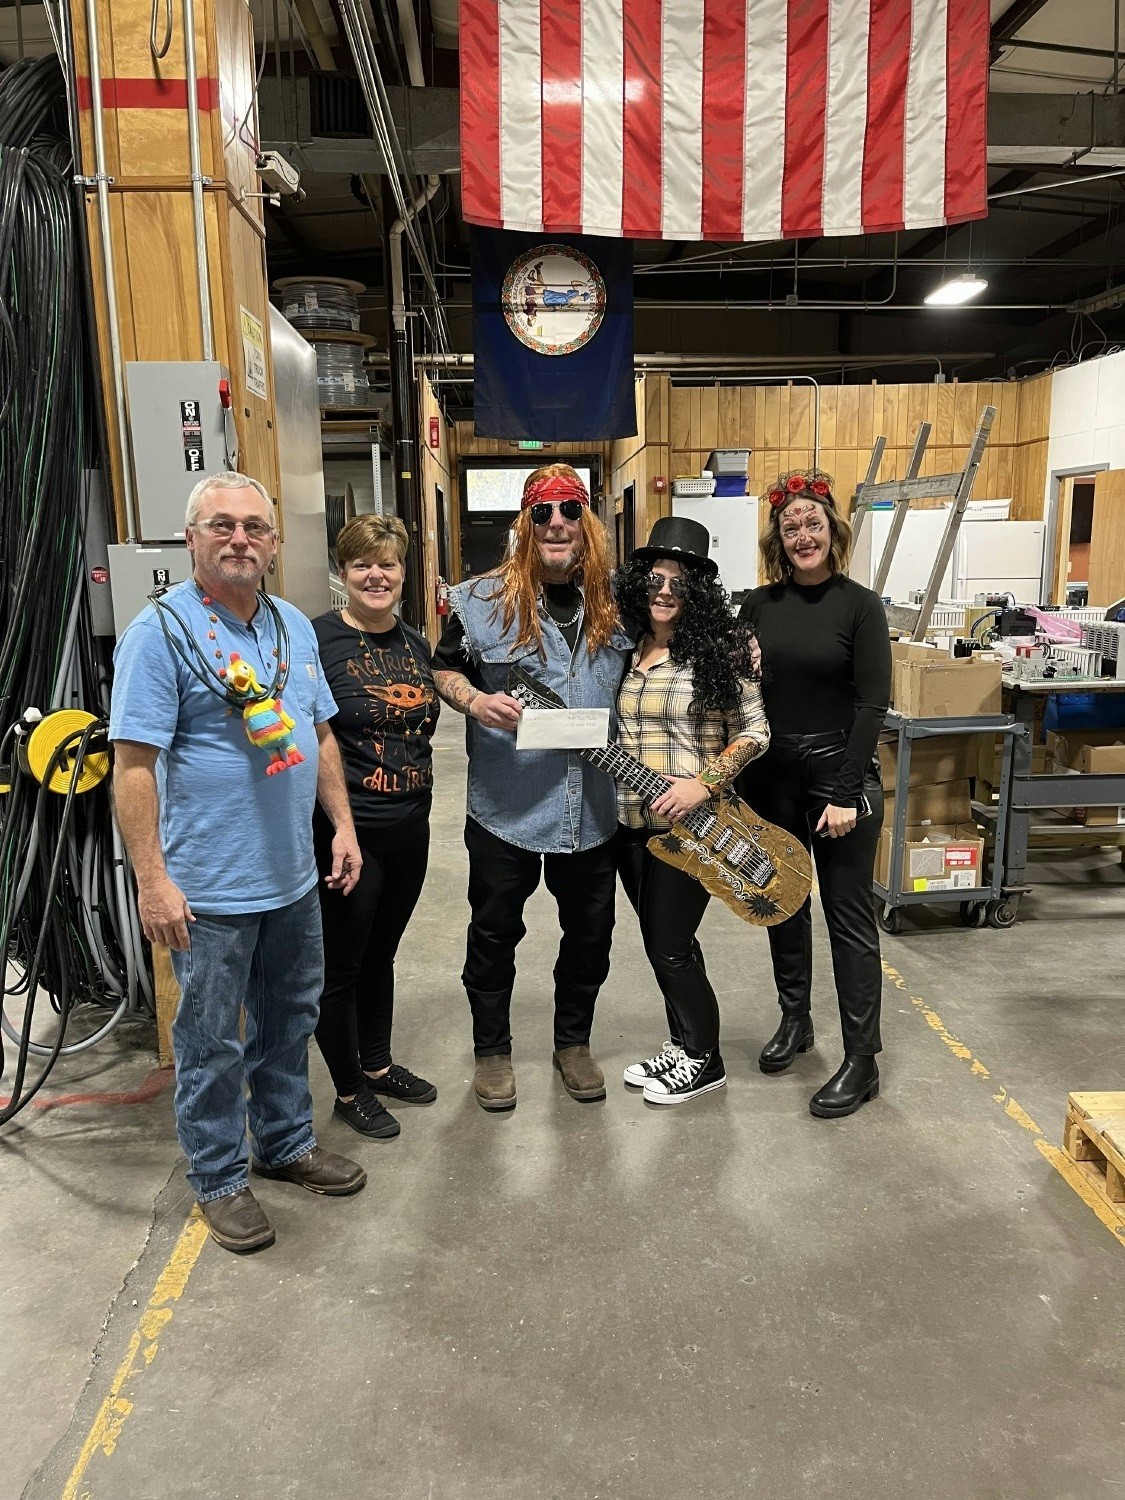 Annual Halloween Costume Contest winners.  Guns N' Roses were awarded a 